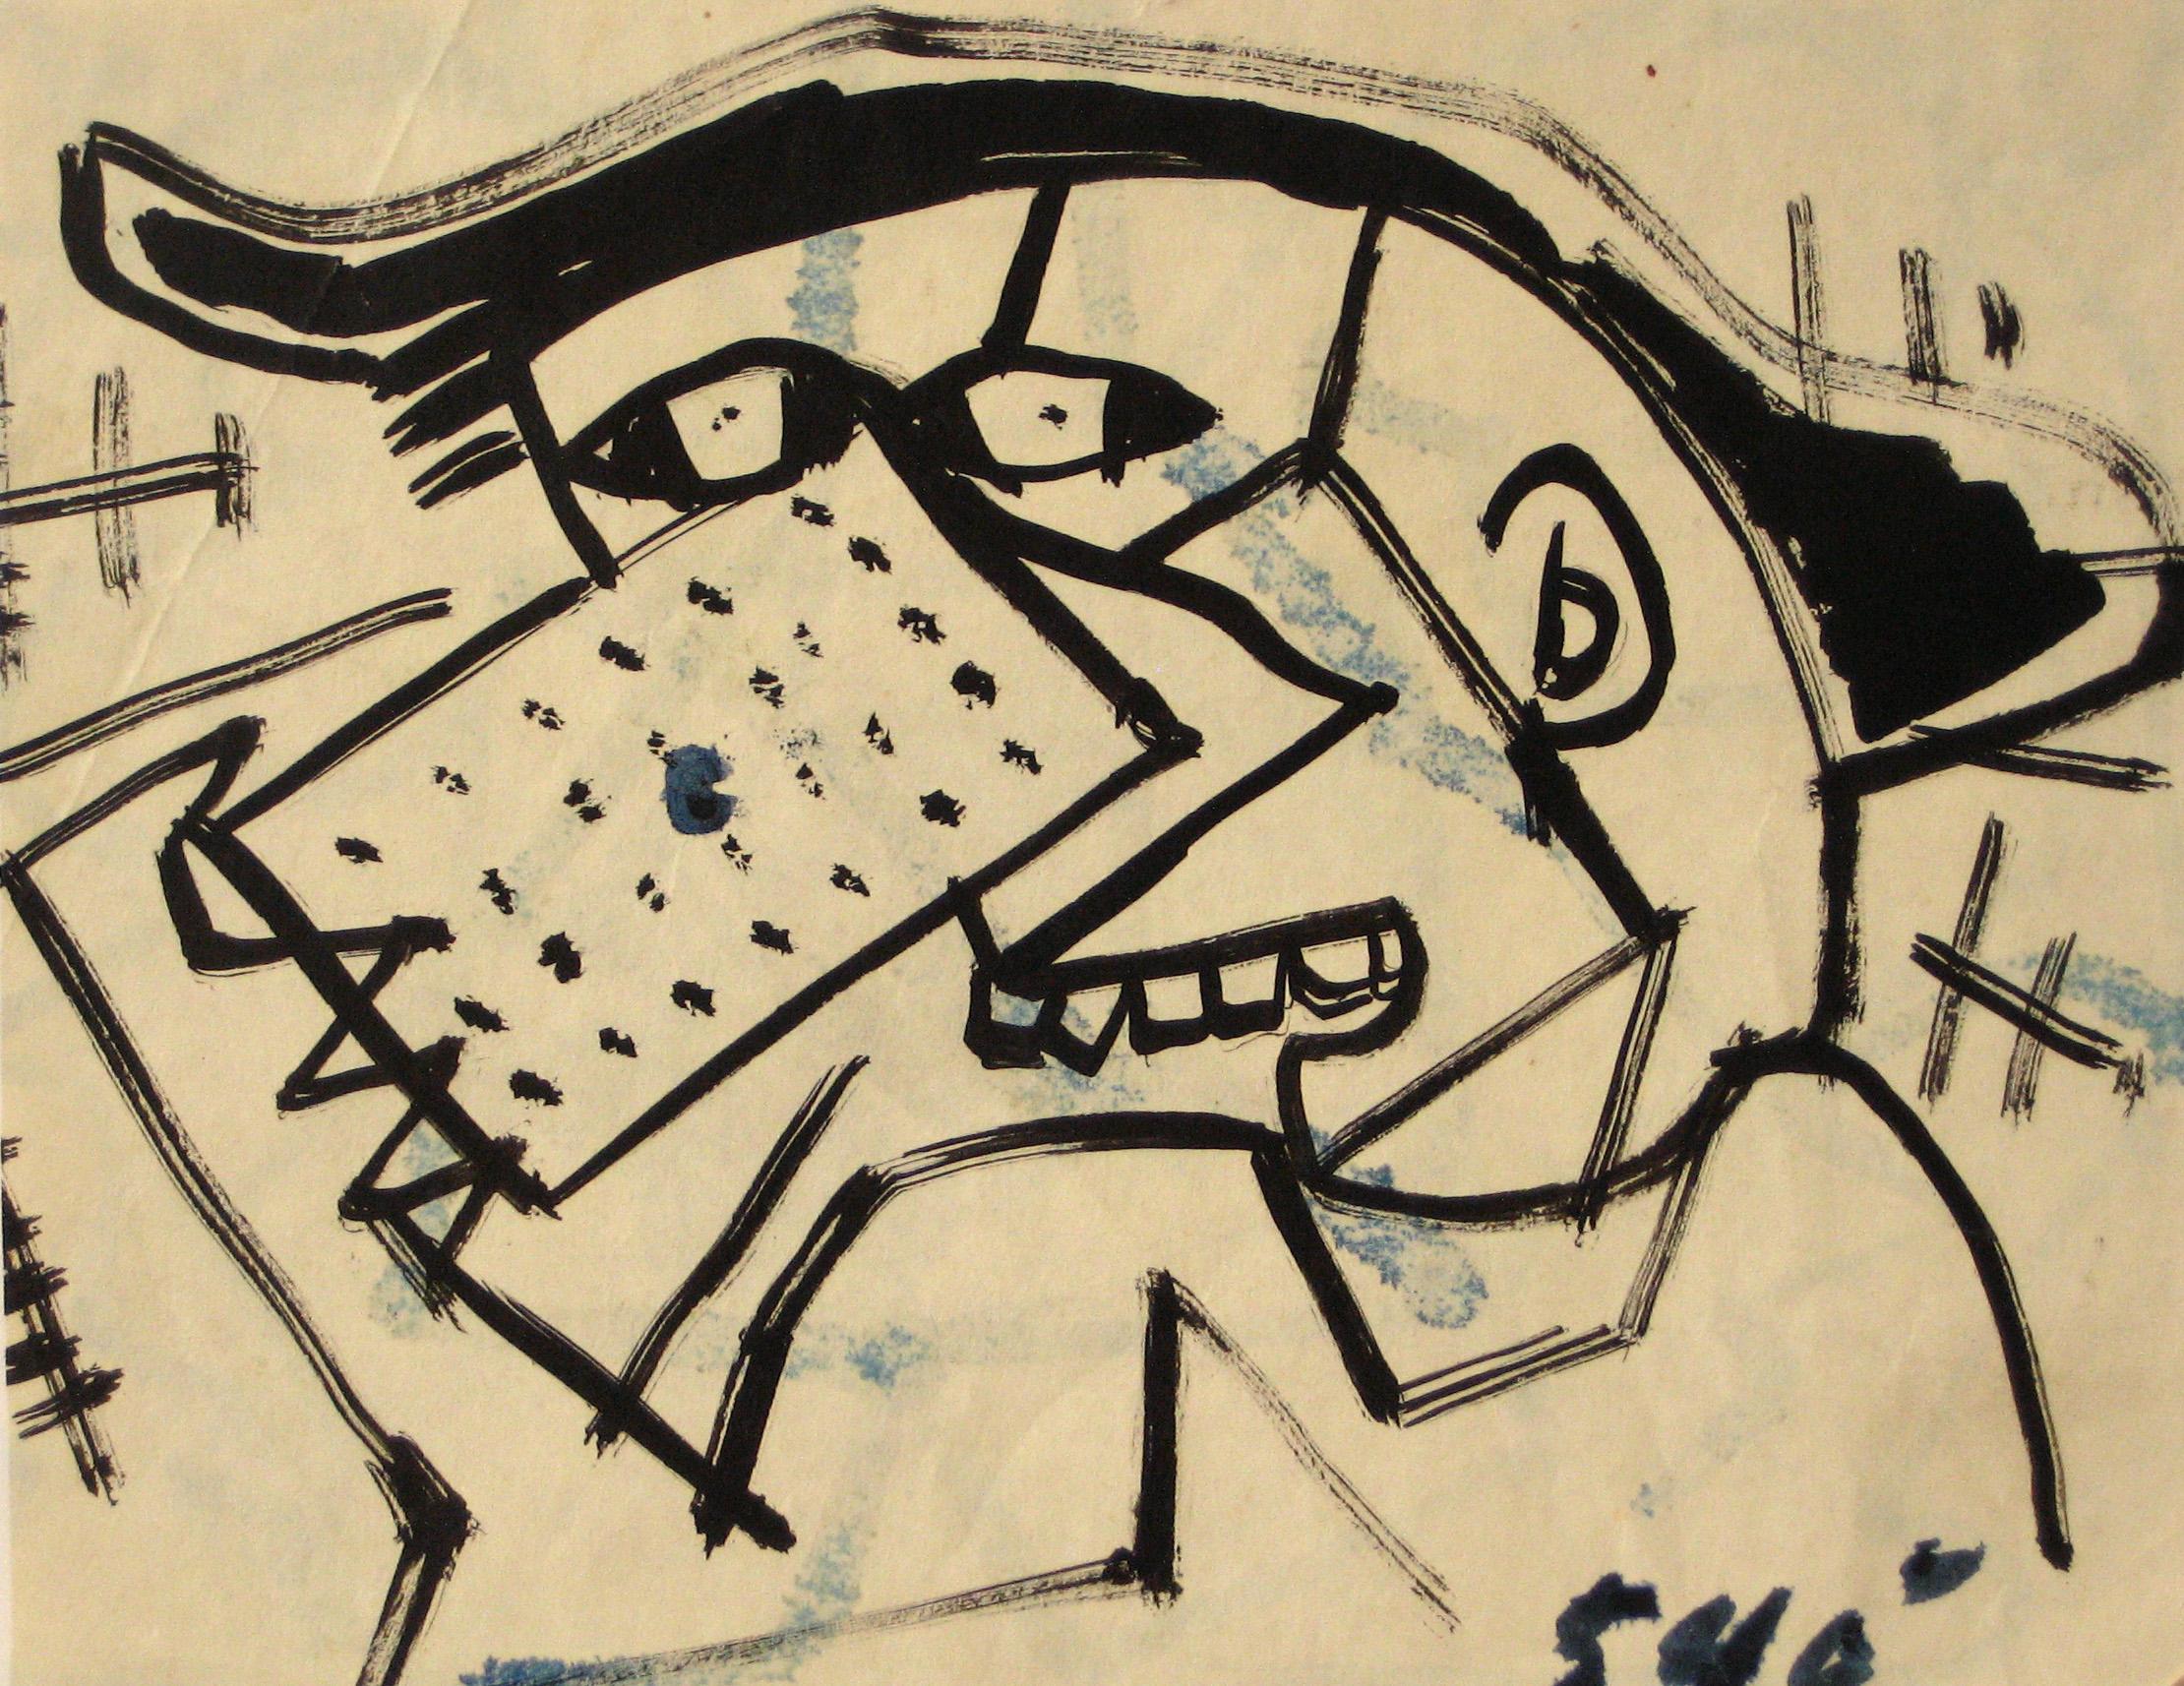 Abstracted Modernist Portrait Drawing in Ink, Circa 1960s